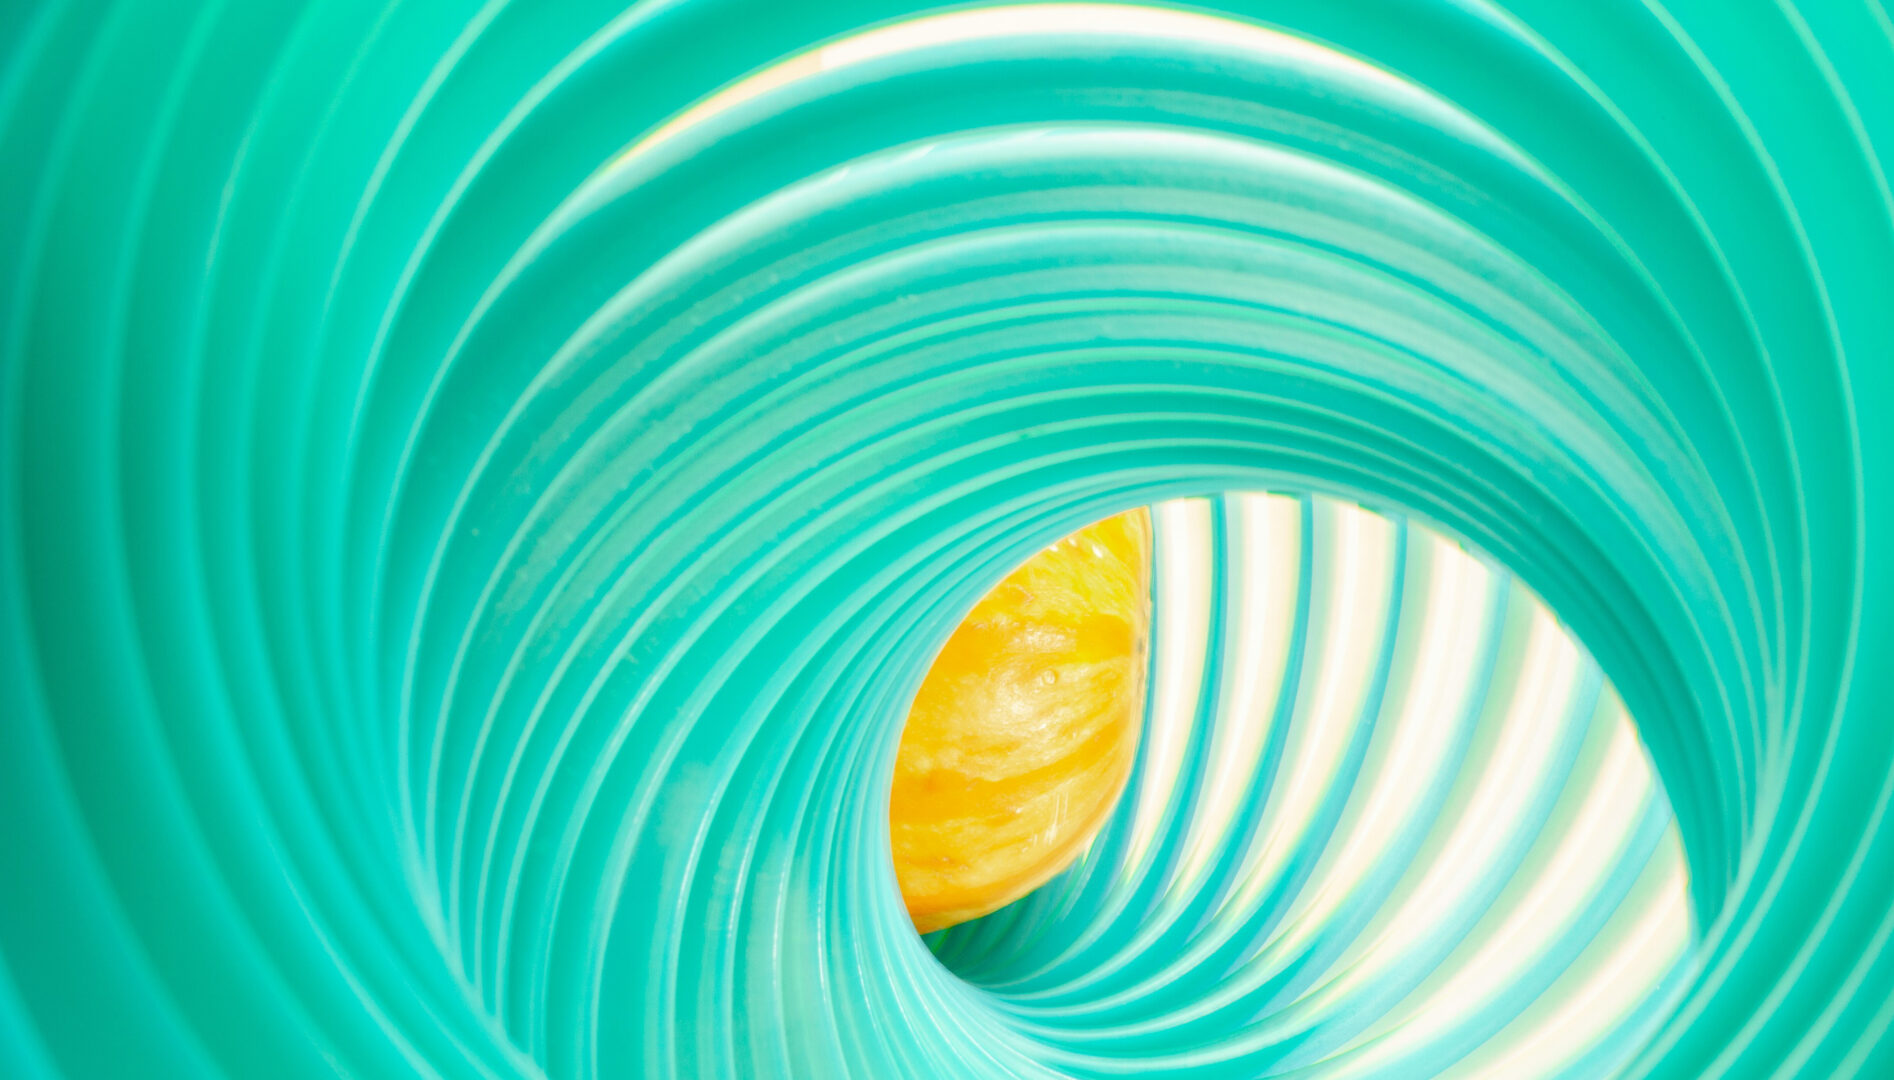 Abstract image of a green slinky-like object with a yellow-orange squash inside of it